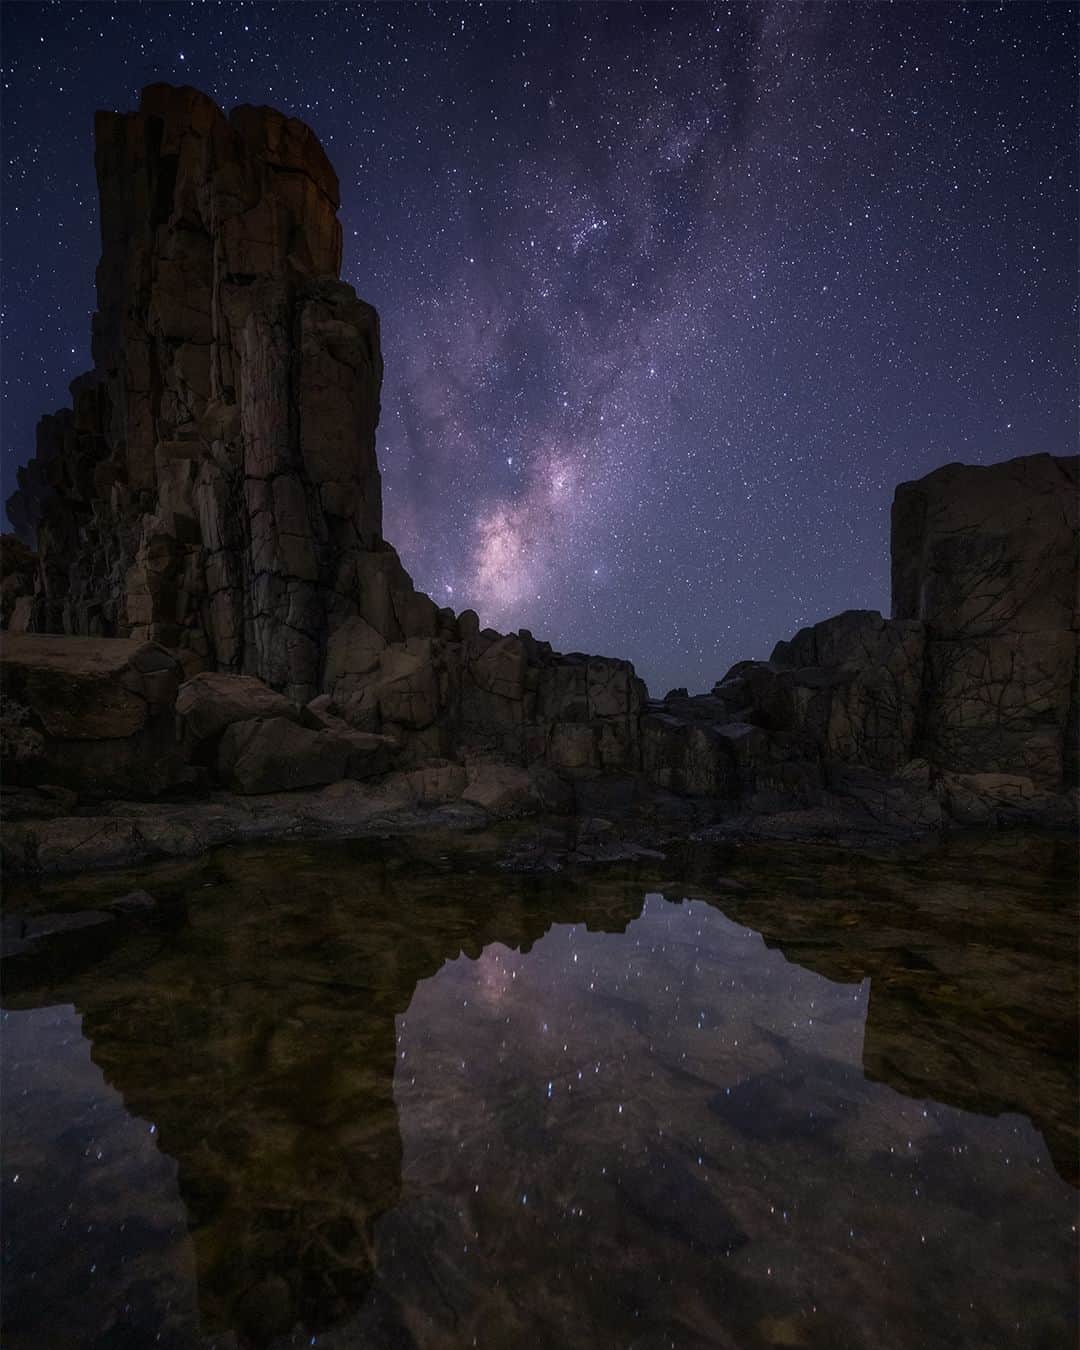 Nikon Australiaのインスタグラム：「Embracing Bombo's enchantment alongside friendly passing fishermen, @ivanzafiris_ skillfully captured the ethereal Milky Way, with a little help from the Z 7II's remarkable focus*.  "On this particular night, the conditions were perfect, a cloudless night with no moon and virtually no wind, the perfect combination for Astro Photography.  I didn't have any compositions in mind and navigating the rocky terrain at night in Bombo can be quite tricky and without the proper footwear can be dangerous. Luckily, I had some help from the passing fisherman who lit up the scene providing some direction and helping me locate a composition. So, with that, I proceeded to set up my camera and use Photo Pills to give me a good idea of where the Milkyway will be rising and at what time in relation to the scene I was planning to photograph.  For this composition, I wanted to get the beautiful reflections of the stars in the water including the amazing shadows of the Basalt Columns found scattered across Bombo. With the foreground completed, I had to wait for about an hour for the Milkyway to rise and be in the right position just behind the Basalt Columns.  The Nikon Z 7II has made my workflow for astrophotography so much easier. The focus to infinity when the Z 7II is turned on is such a time saver as I don't need to worry about focusing on stars when on location and the extended shutter allows me to take long exposures for my foreground without the need of an external intervalometer."  Photo by @ivanzafiris_  Captured on the Z 7II and NIKKOR Z 14-24mm f/2.8 S  *This image is a blended composite  #Nikon #NikonAustralia #MyNikonLife #NikonCreators #NIKKOR #Z7II #NikonZ7II #Zseries #LandscapePhotography #AstroPhotography #Australia」